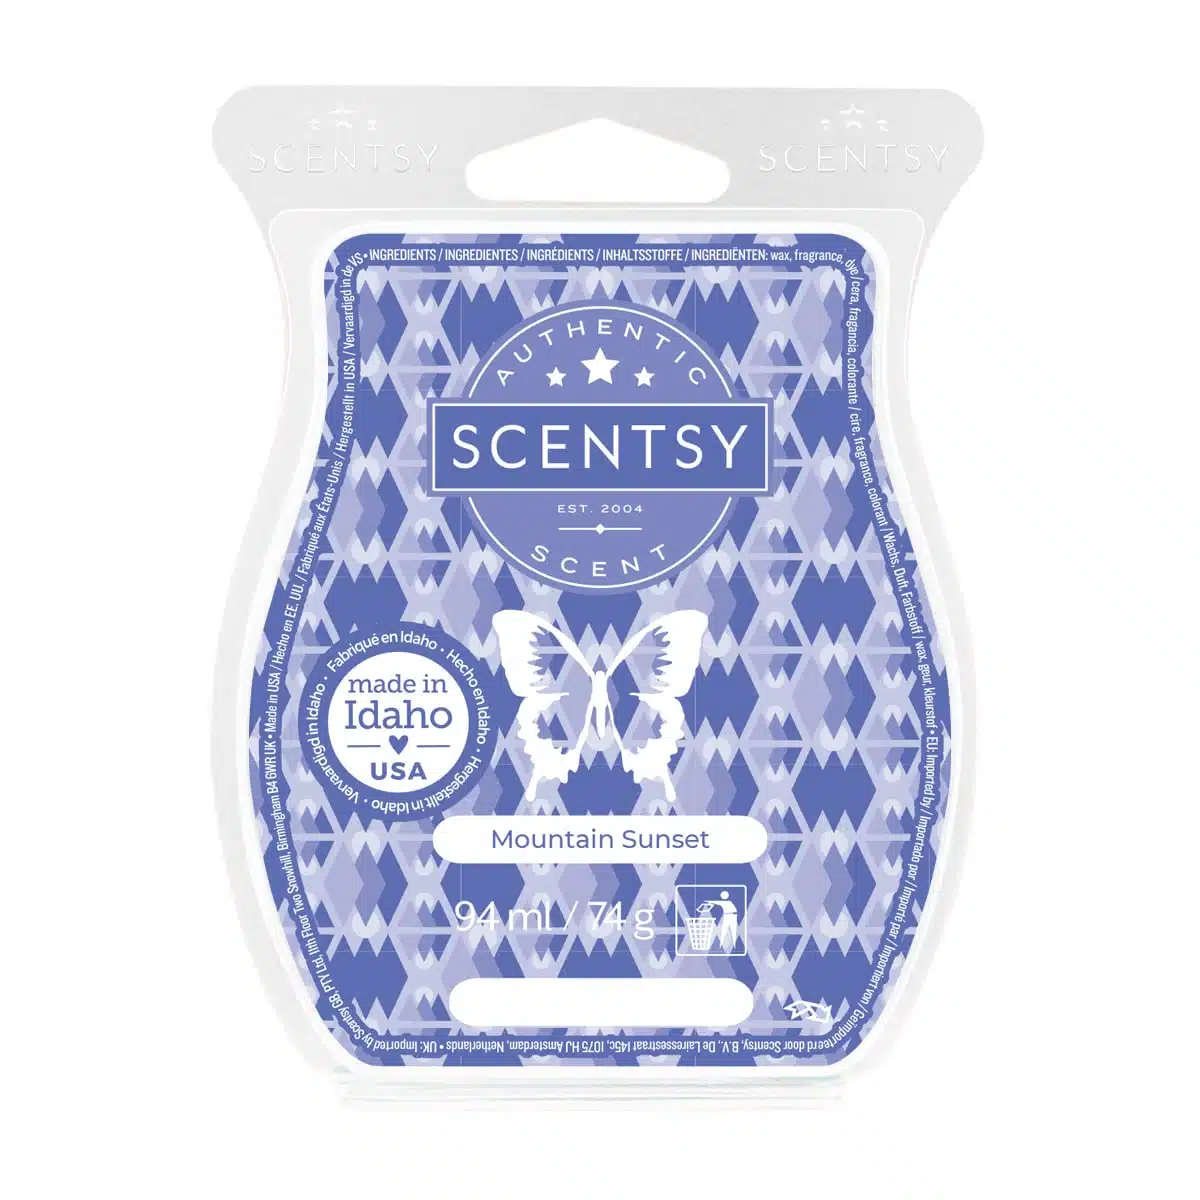 Mountain Sunset Scentsy Wax Melt - Scentsy Warming Candles